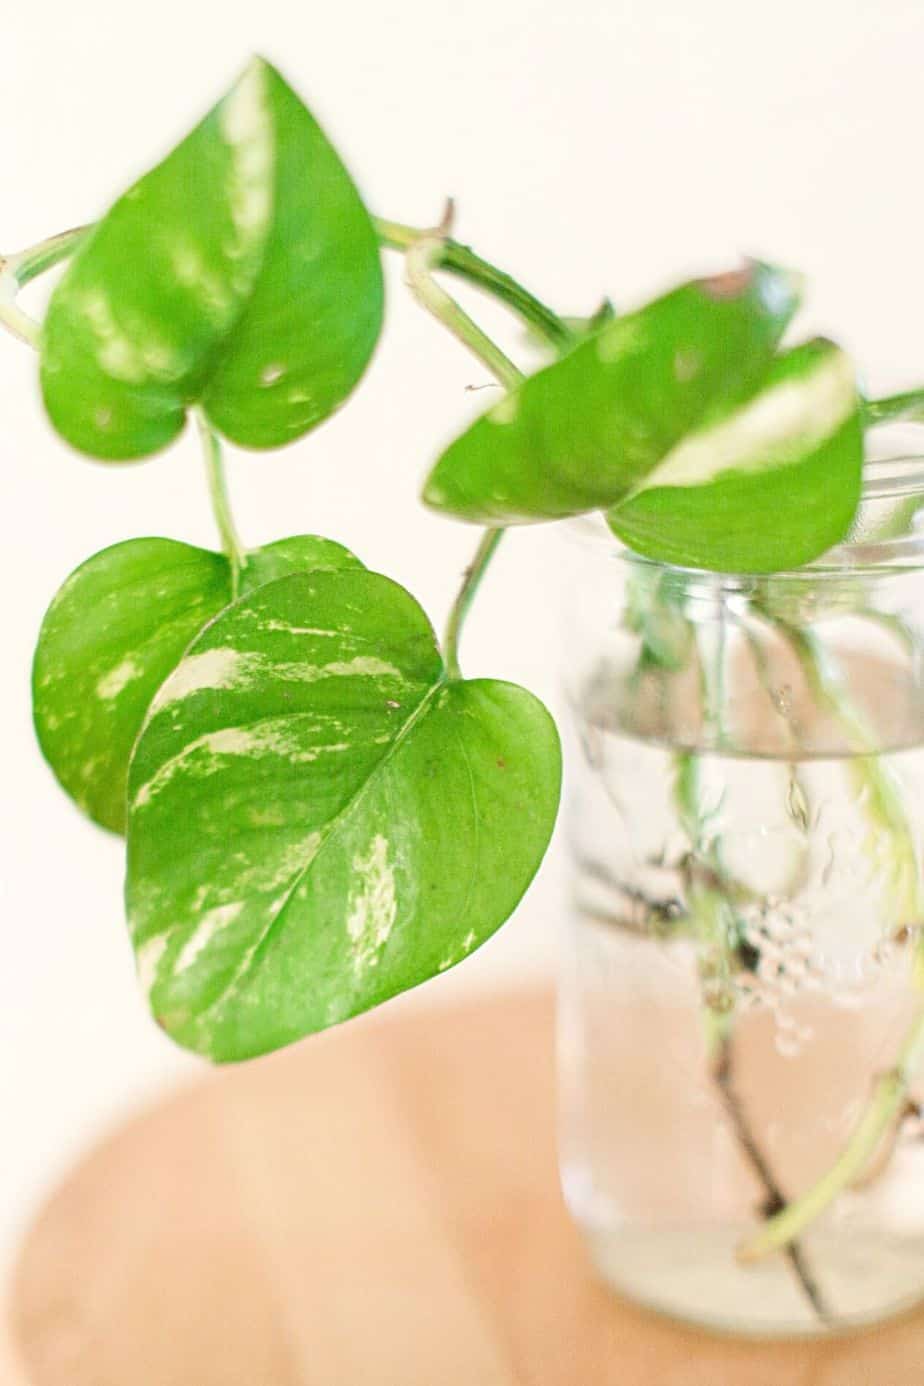 Pothos has shiny heart-shaped foliage that grows well in water